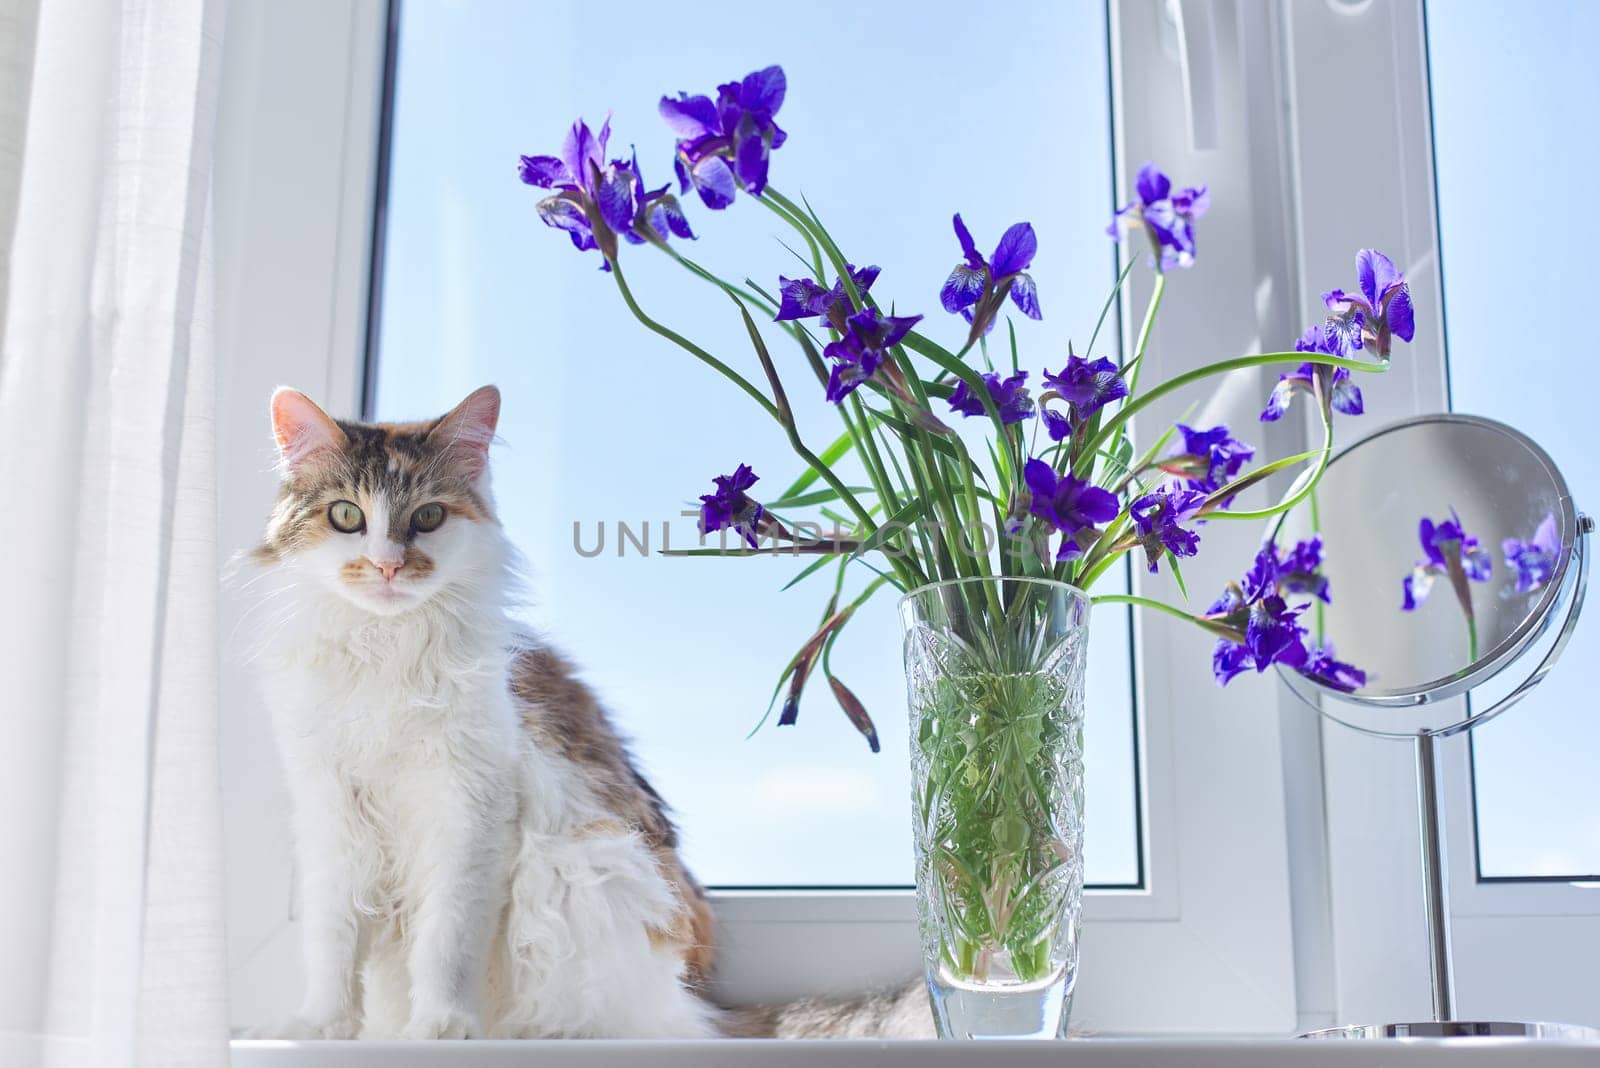 Tricolor cat sitting on a windowsill with a vase and bouquets of blue purple irises. Blue sky in window background